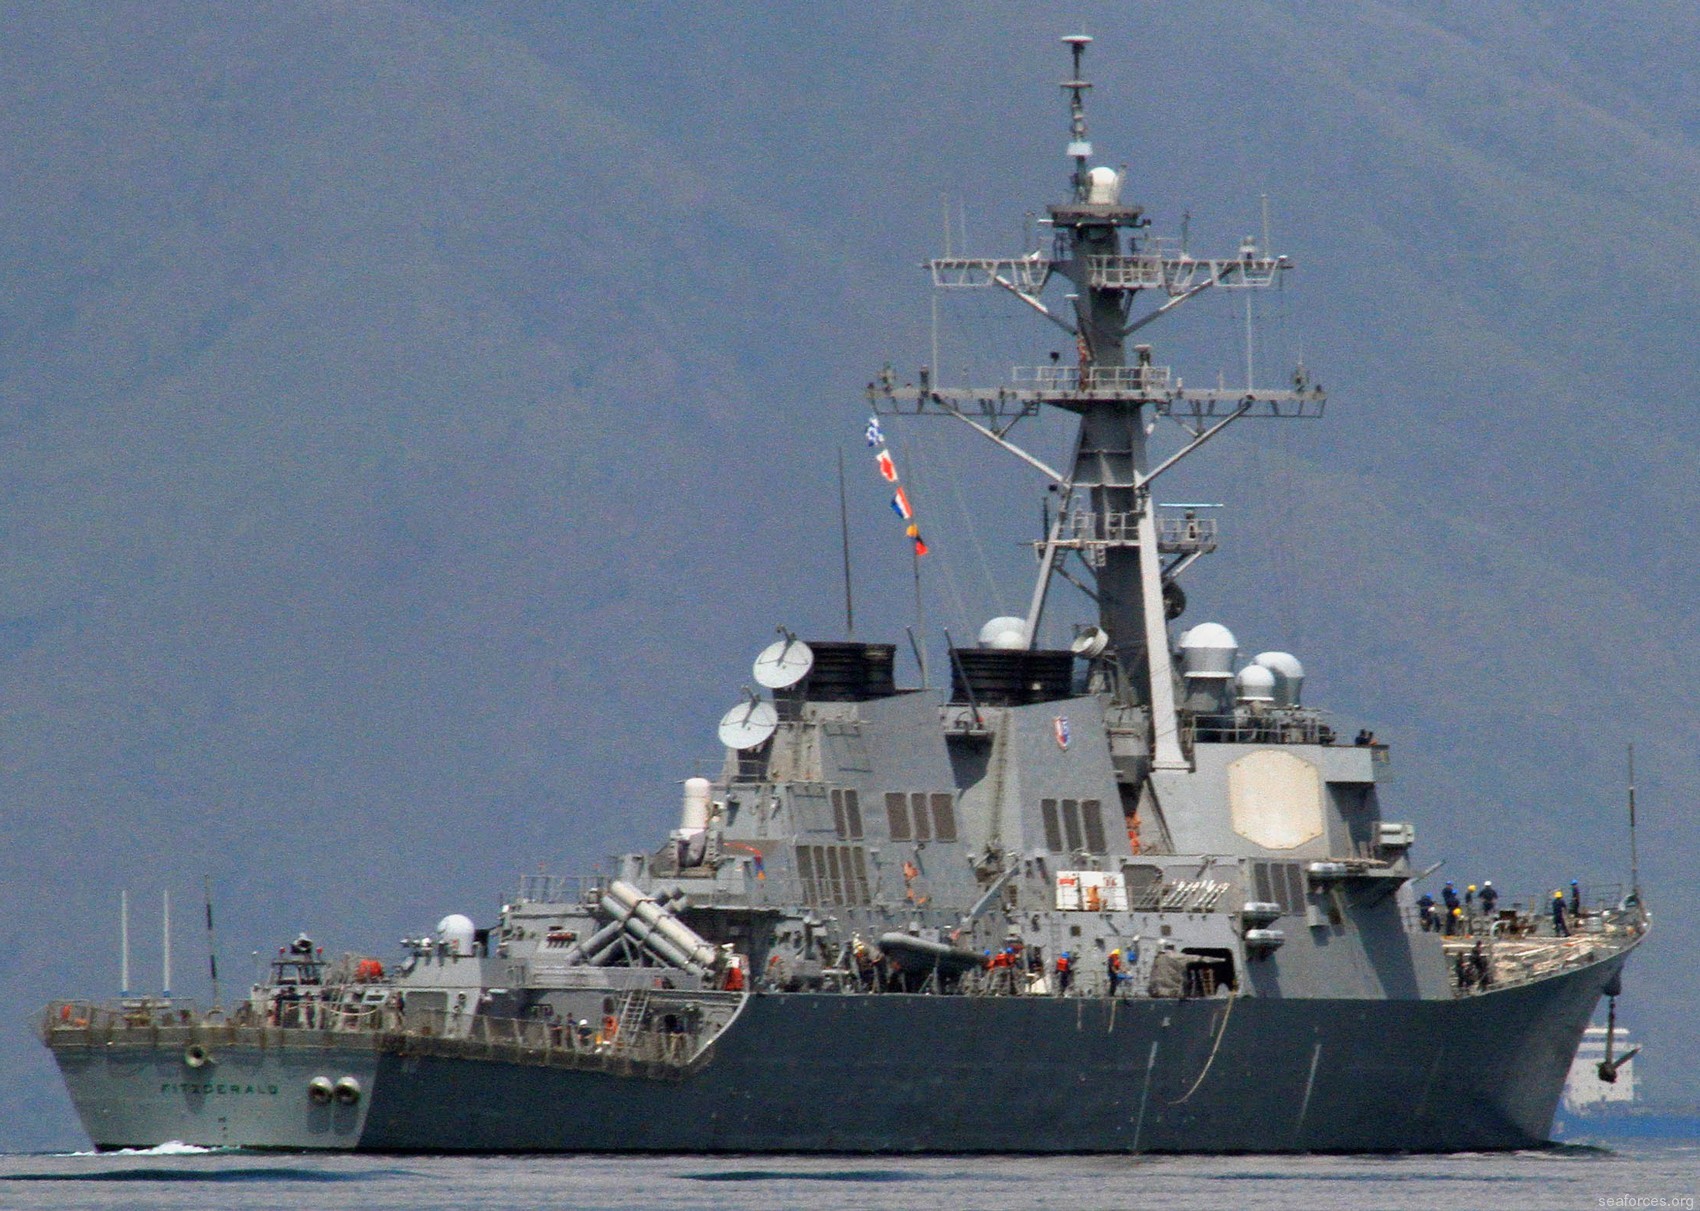 ddg-62 uss fitzgerald guided missile destroyer 2013 51 subic bay philippines